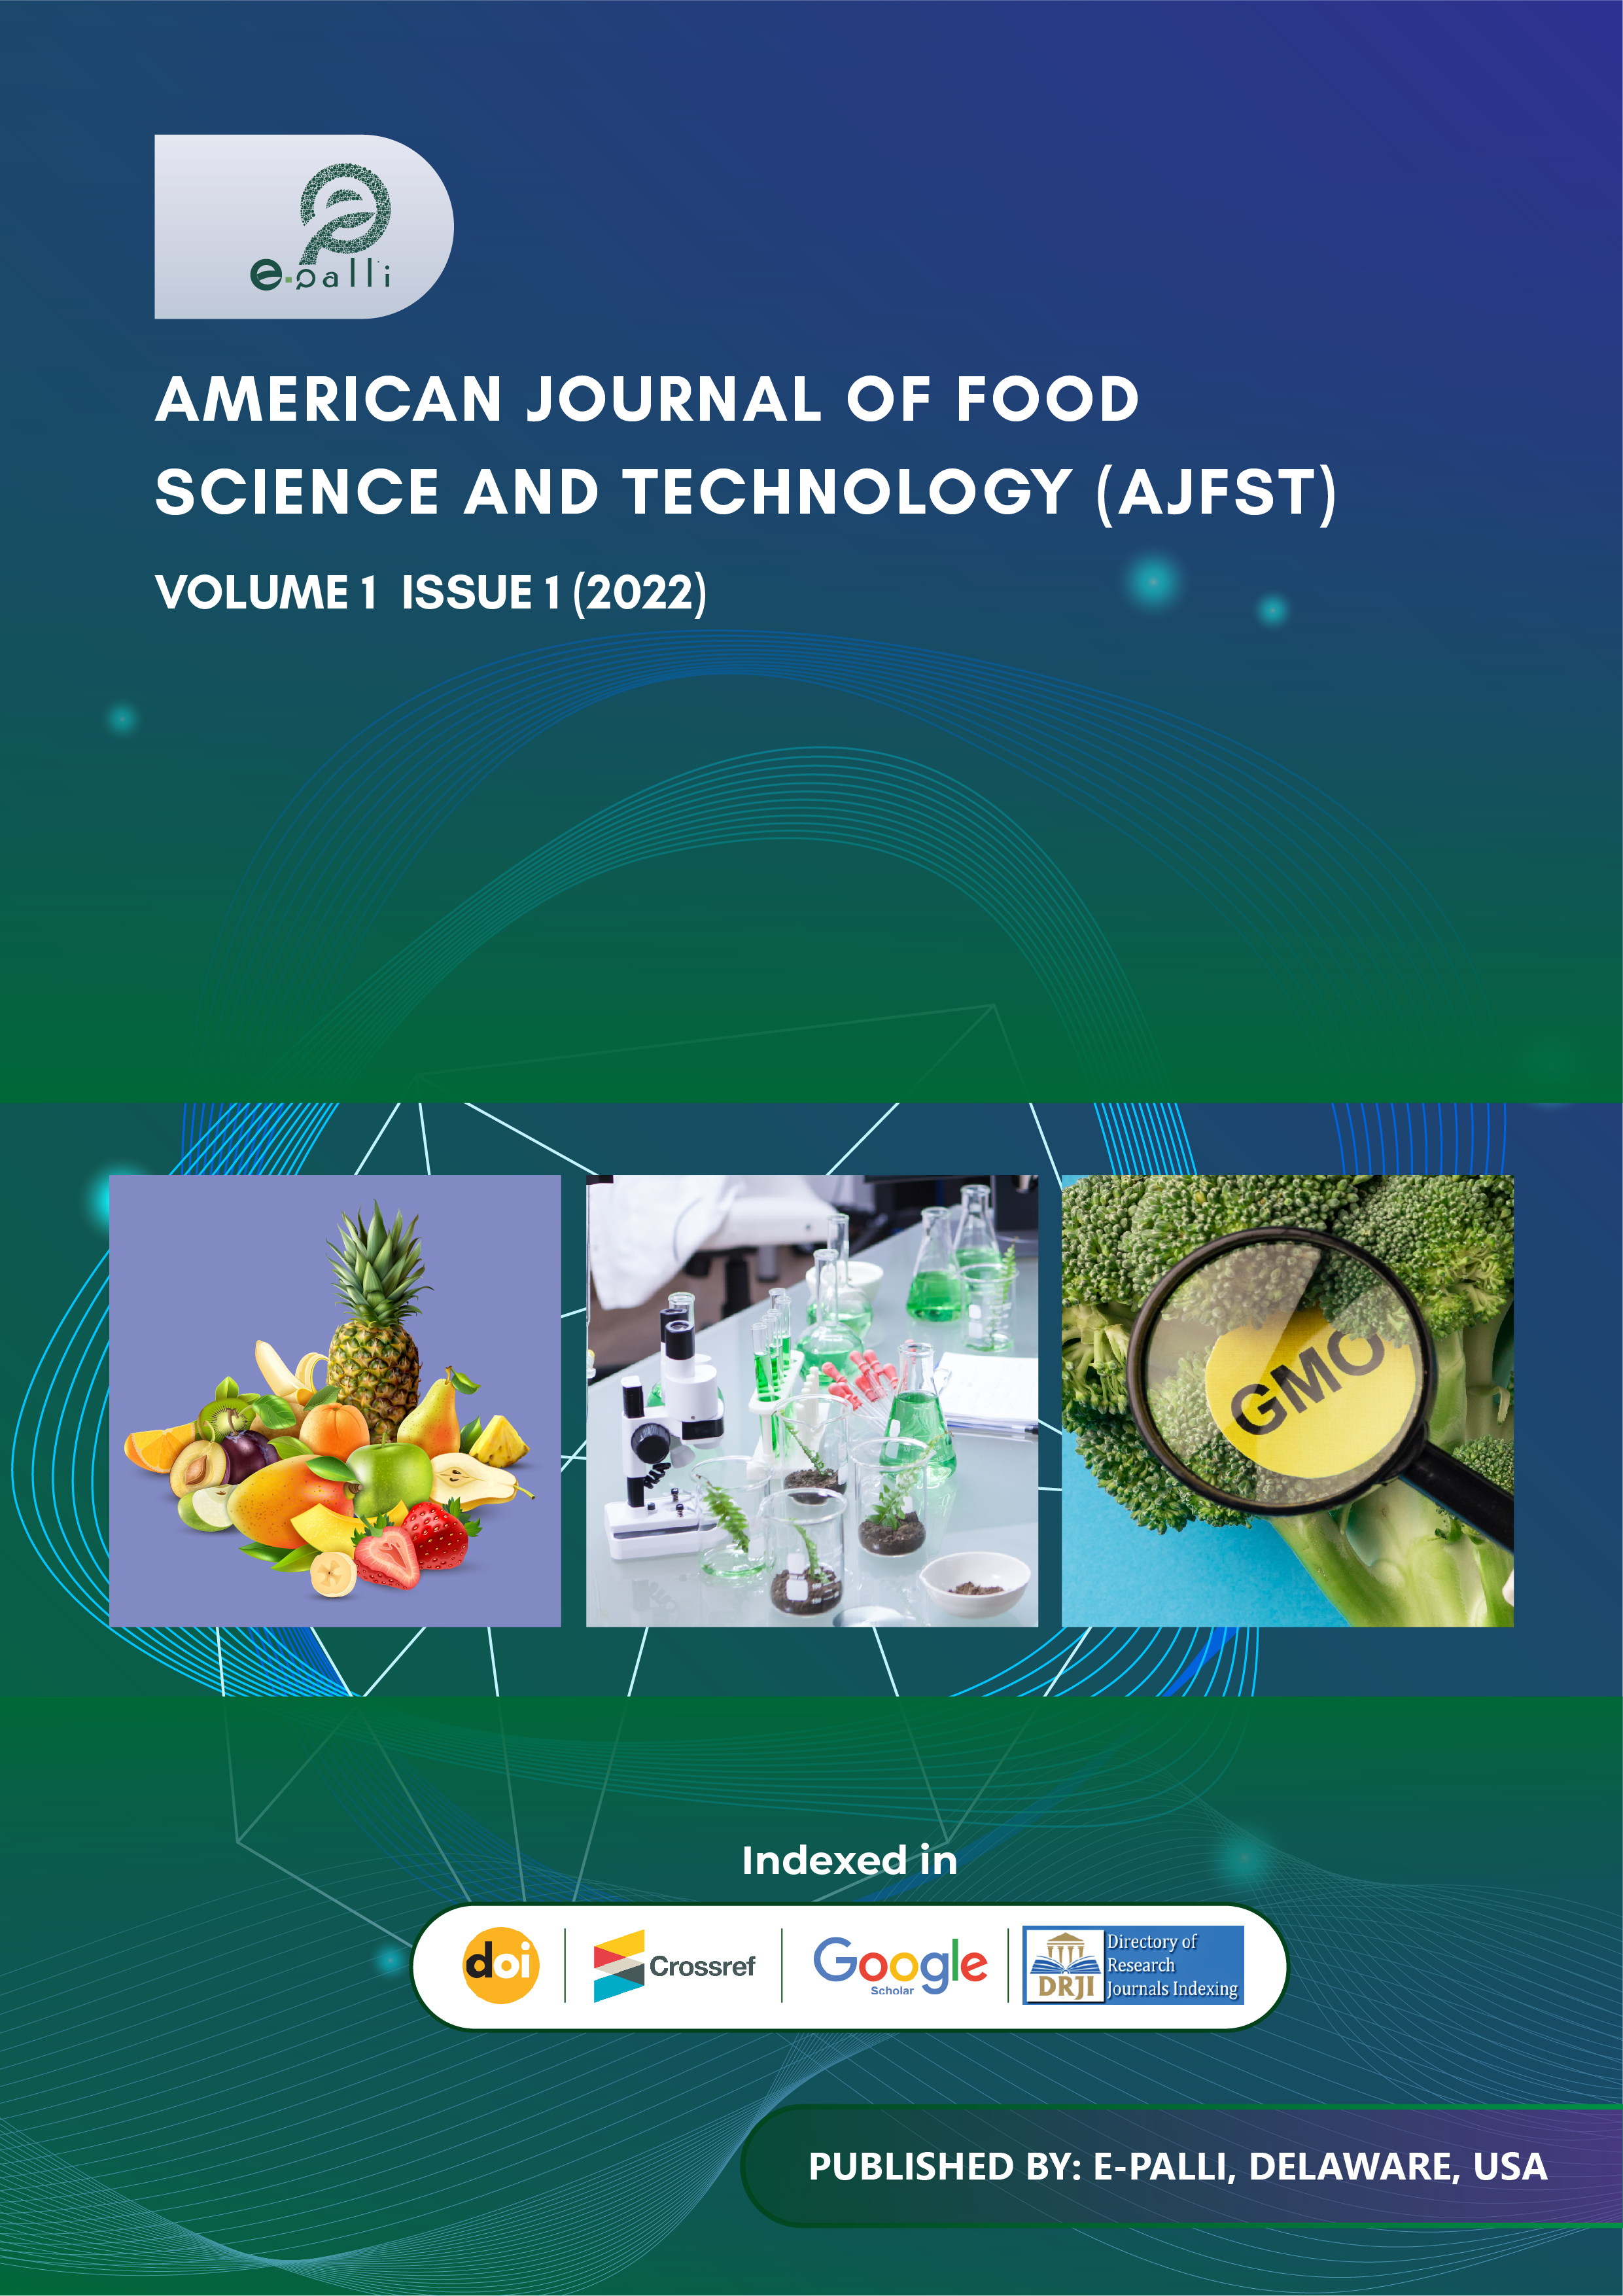 					View Vol. 1 No. 1 (2022): American Journal of Food Science and Technology
				